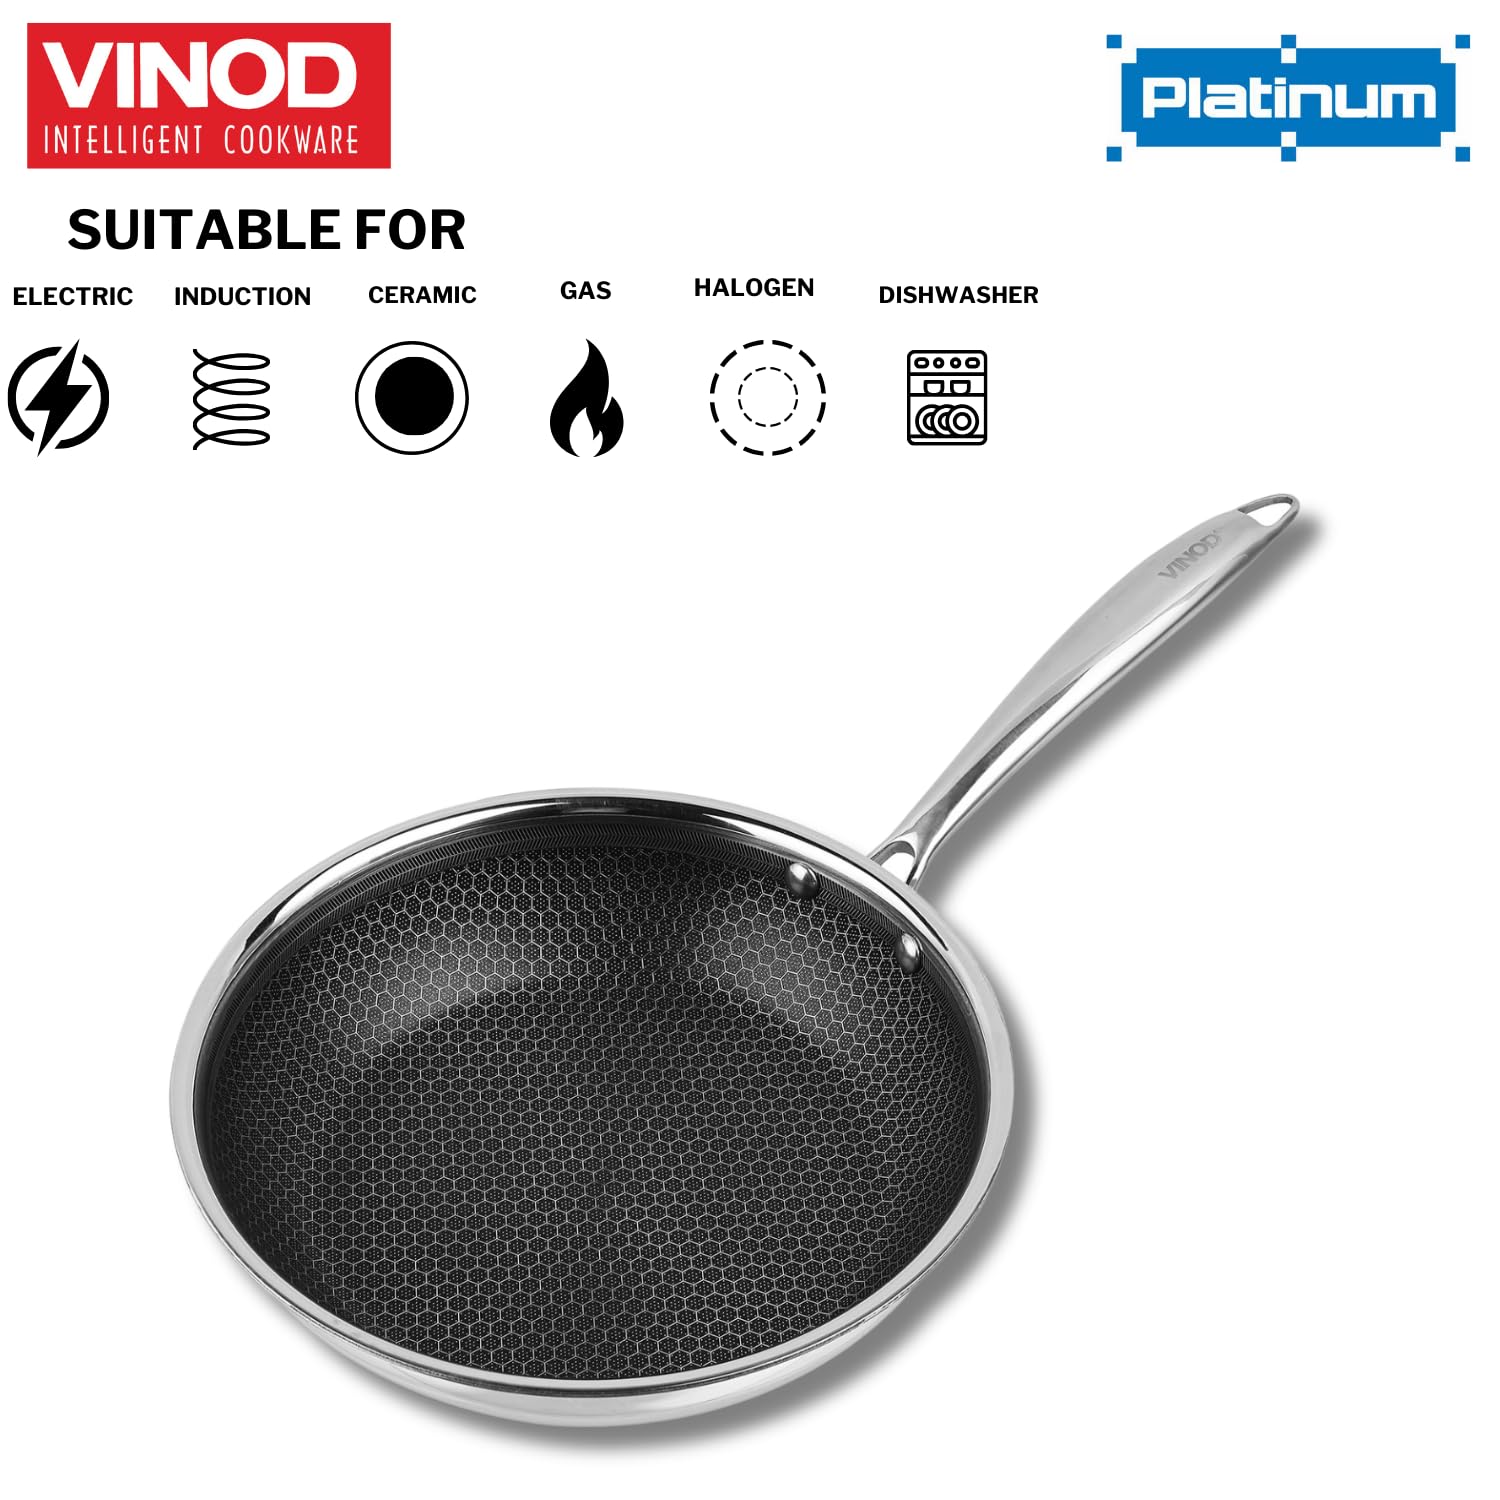 Vinod Platinum Triply Stainless Steel X Fry Pan | Frying Pan of 24 cm Diameter with Honeycomb Pattern Design Inside, Scratch Resistant, Food Safe & PFOA Free - (Induction Friendly)